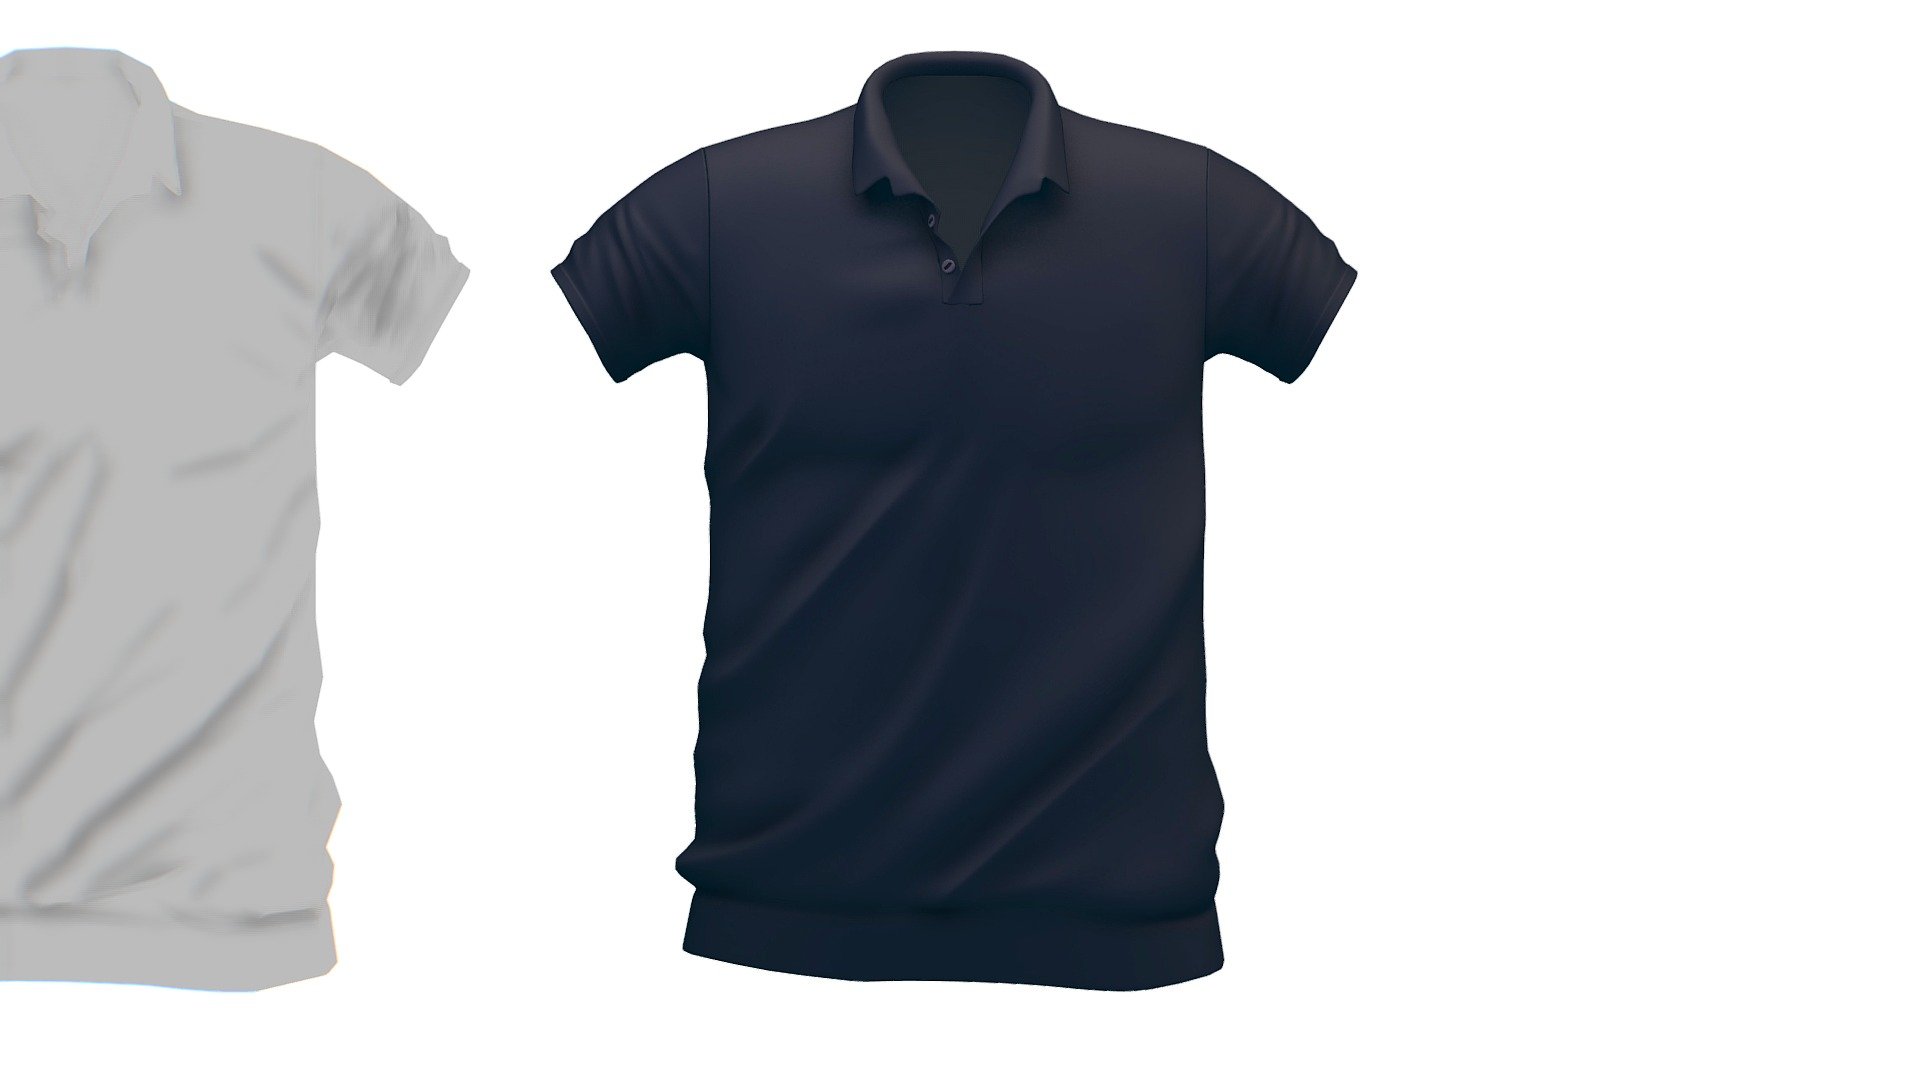 Cartoon High Poly Subdivision  Dark Blue Polo

No HDRI map, No Light, No material settings - only Diffuse/Color Map Texture (2500х2500) 

More information about the 3D model: please use the Sketchfab Model Inspector - Key (i) - Cartoon High Poly Subdivision Dark Blue Polo - Buy Royalty Free 3D model by Oleg Shuldiakov (@olegshuldiakov) 3d model